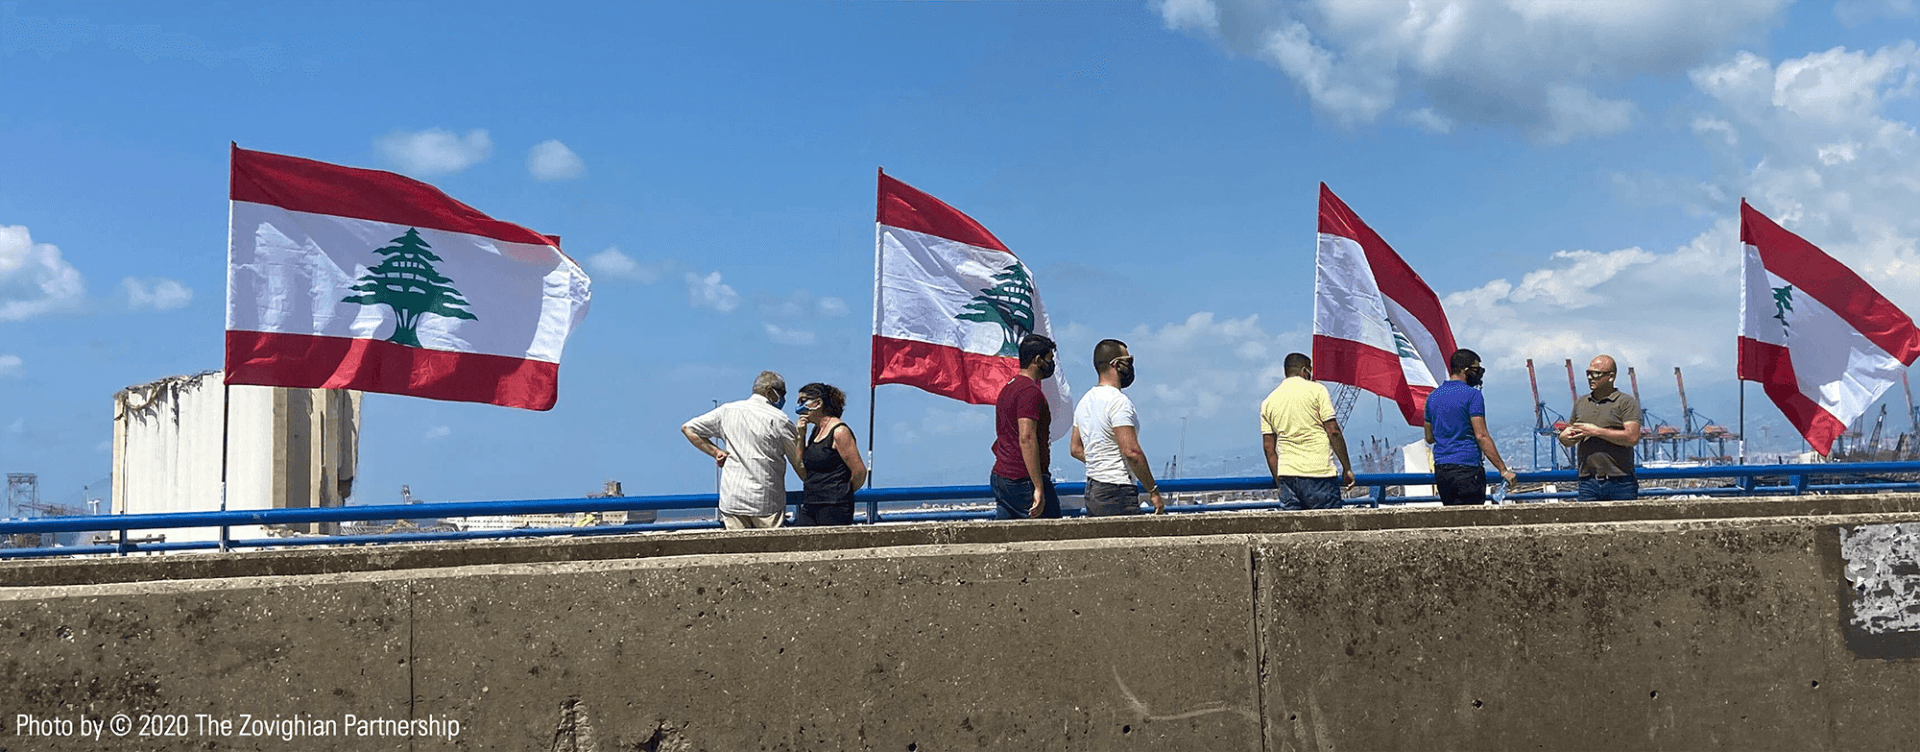 Following the Beirut blast, protestors rallying on the bridge deployed with Lebanese flags